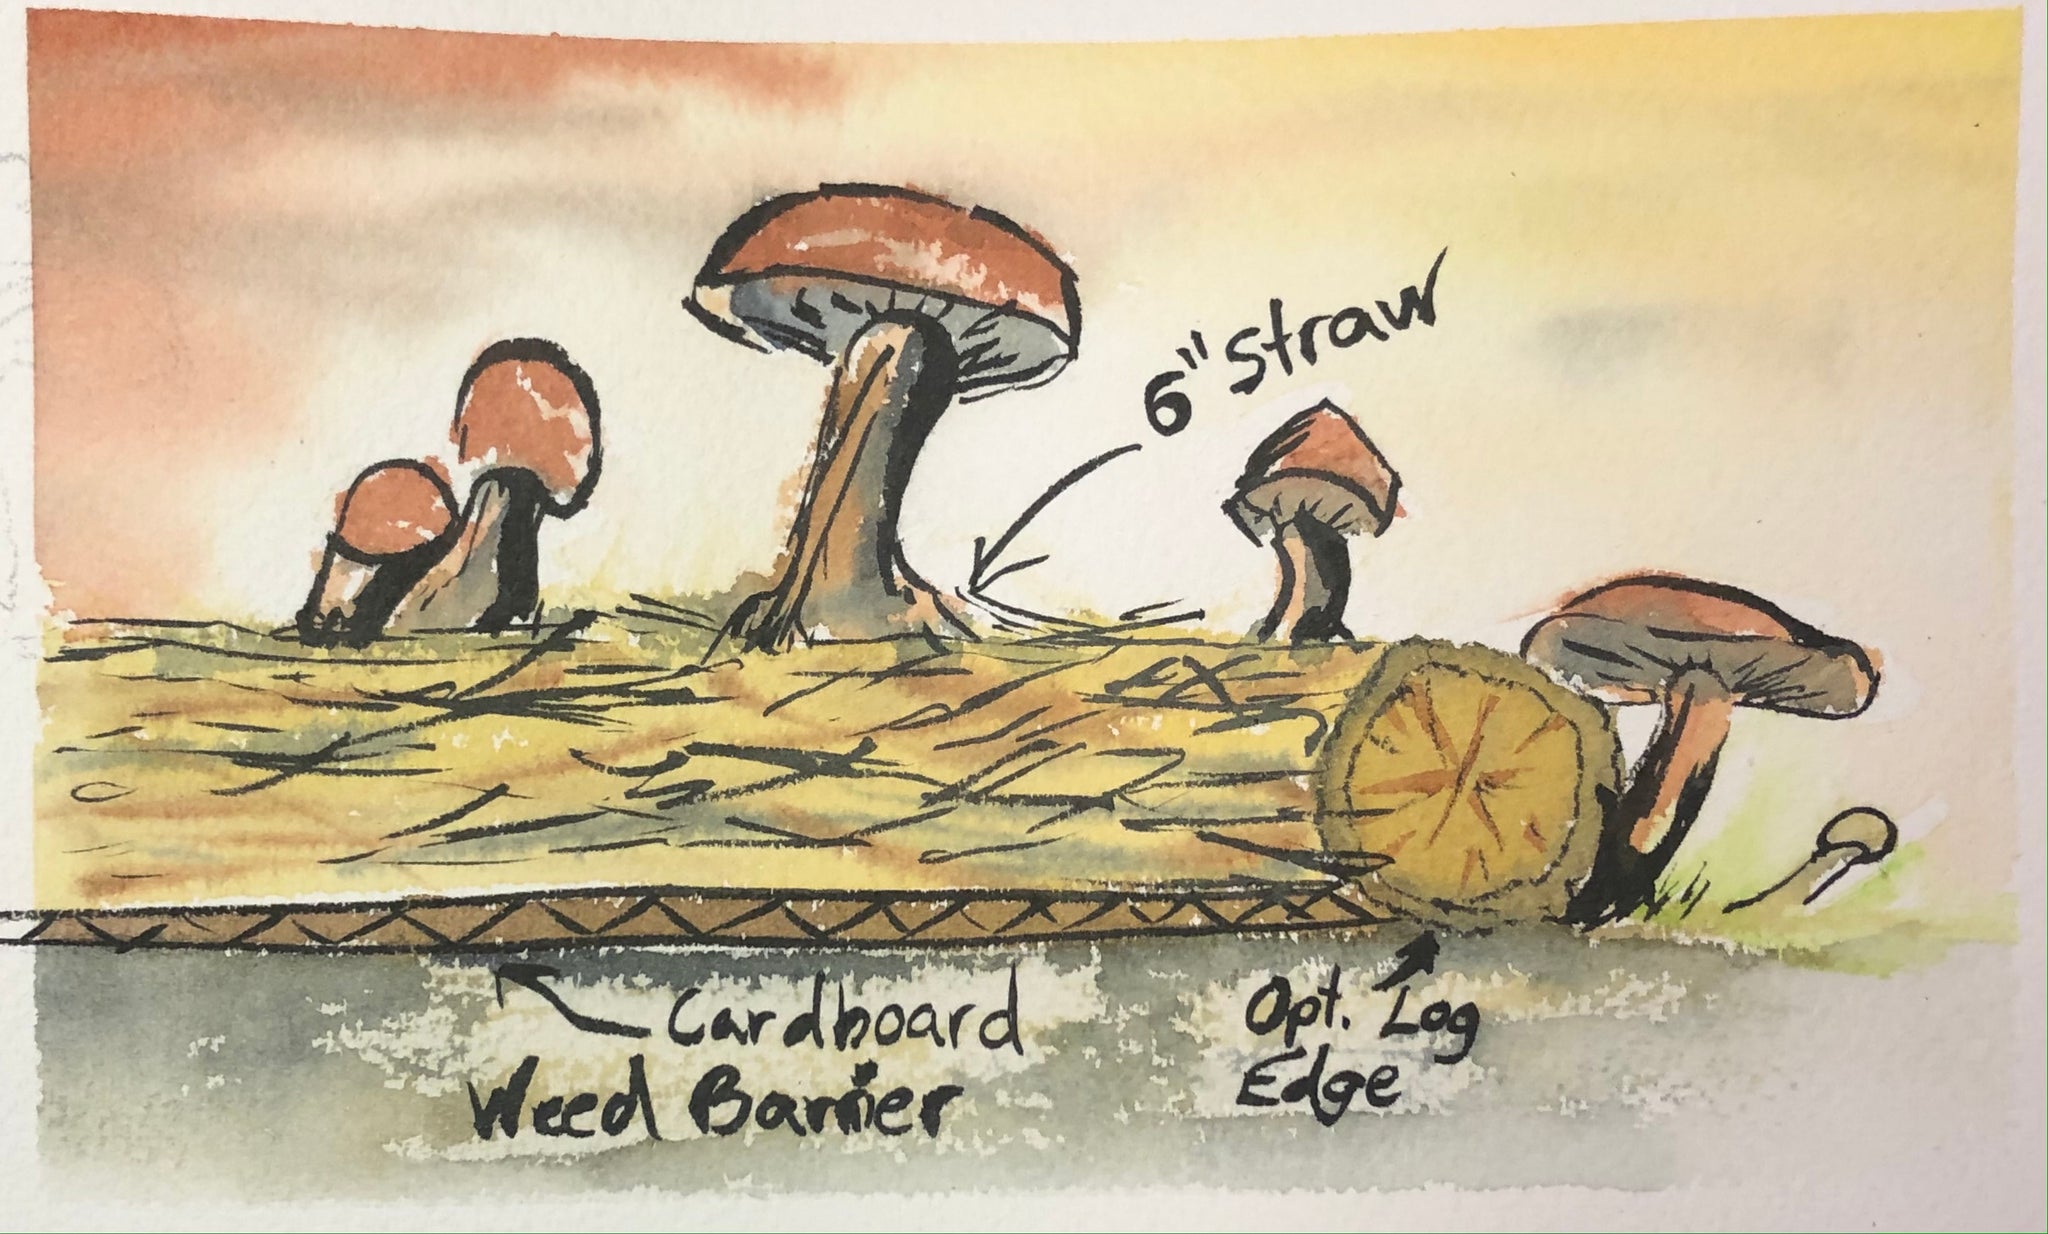 Fungi Frenzy: A Beginner's Guide to Outdoor Mushroom Growing - 90 min